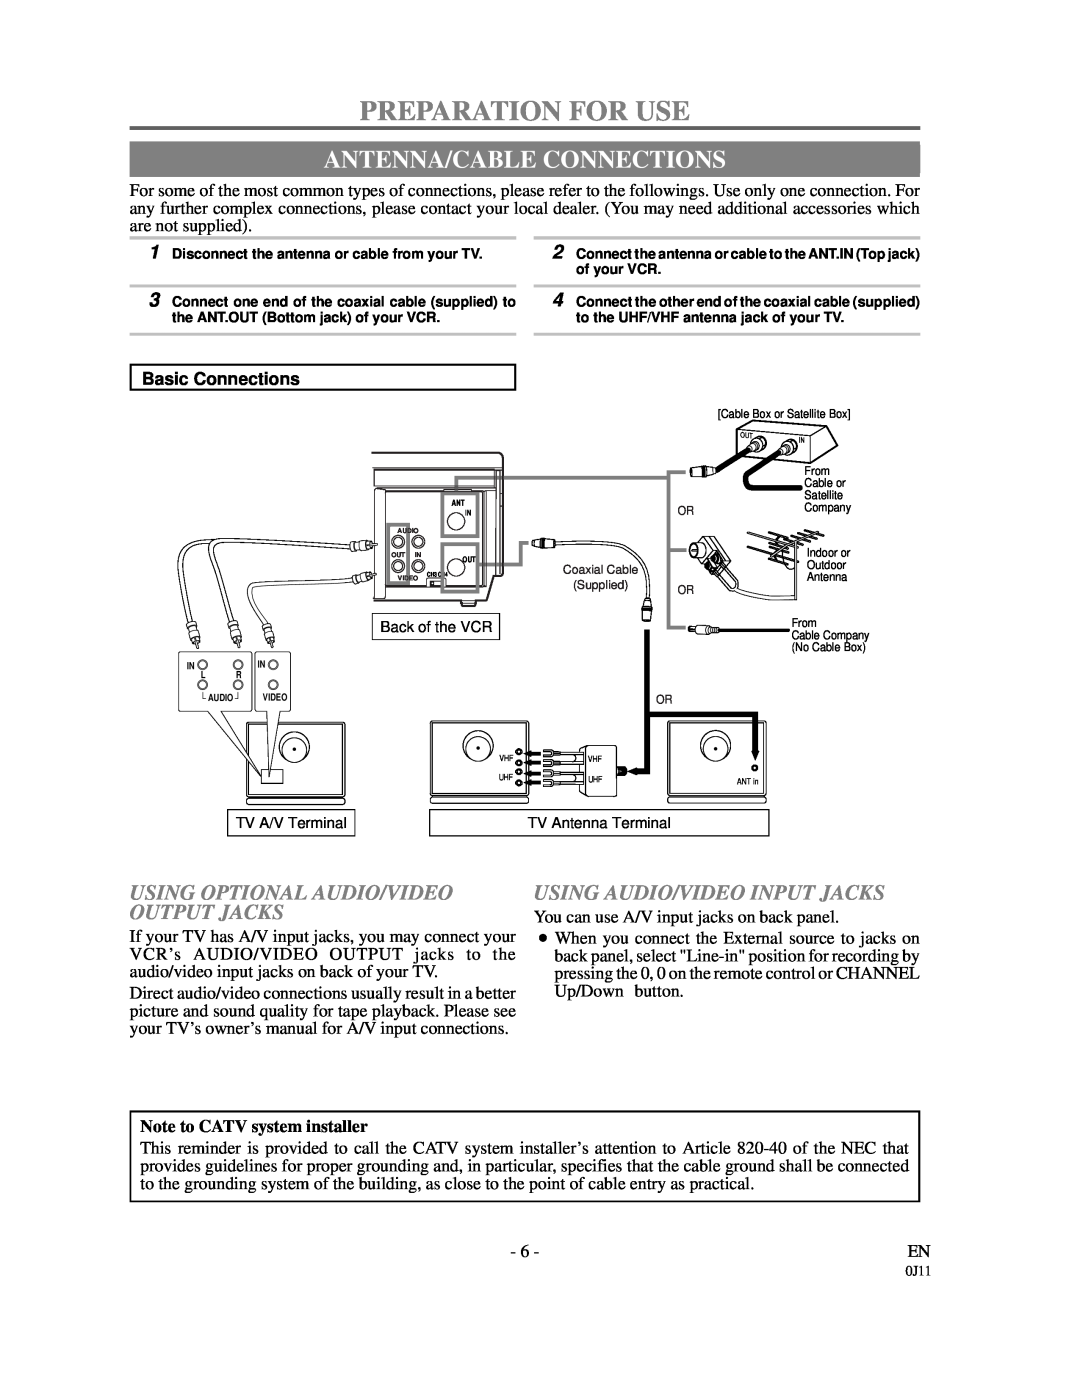 Symphonic SF225B owner manual Preparation For Use, Antenna/Cable Connections, Using Optional Audio/Video Output Jacks 